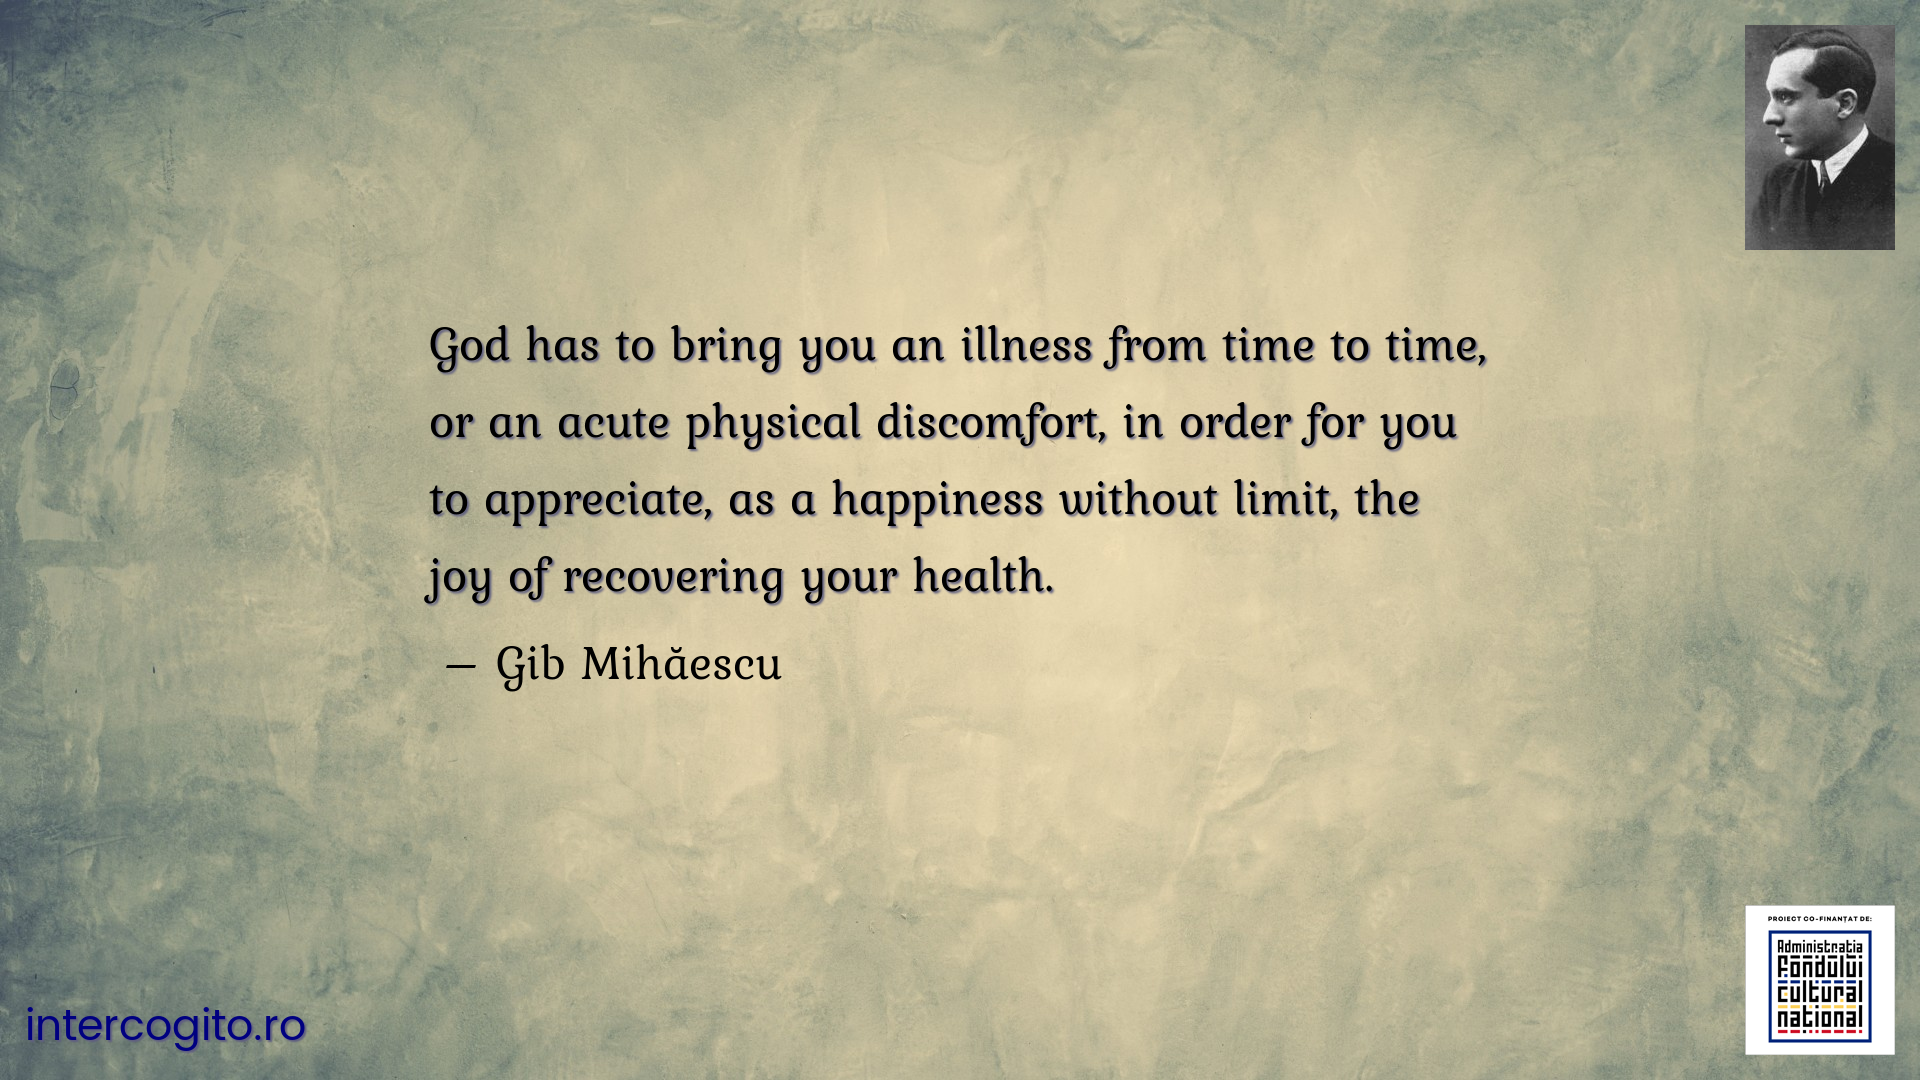 God has to bring you an illness from time to time, or an acute physical discomfort, in order for you to appreciate, as a happiness without limit, the joy of recovering your health.